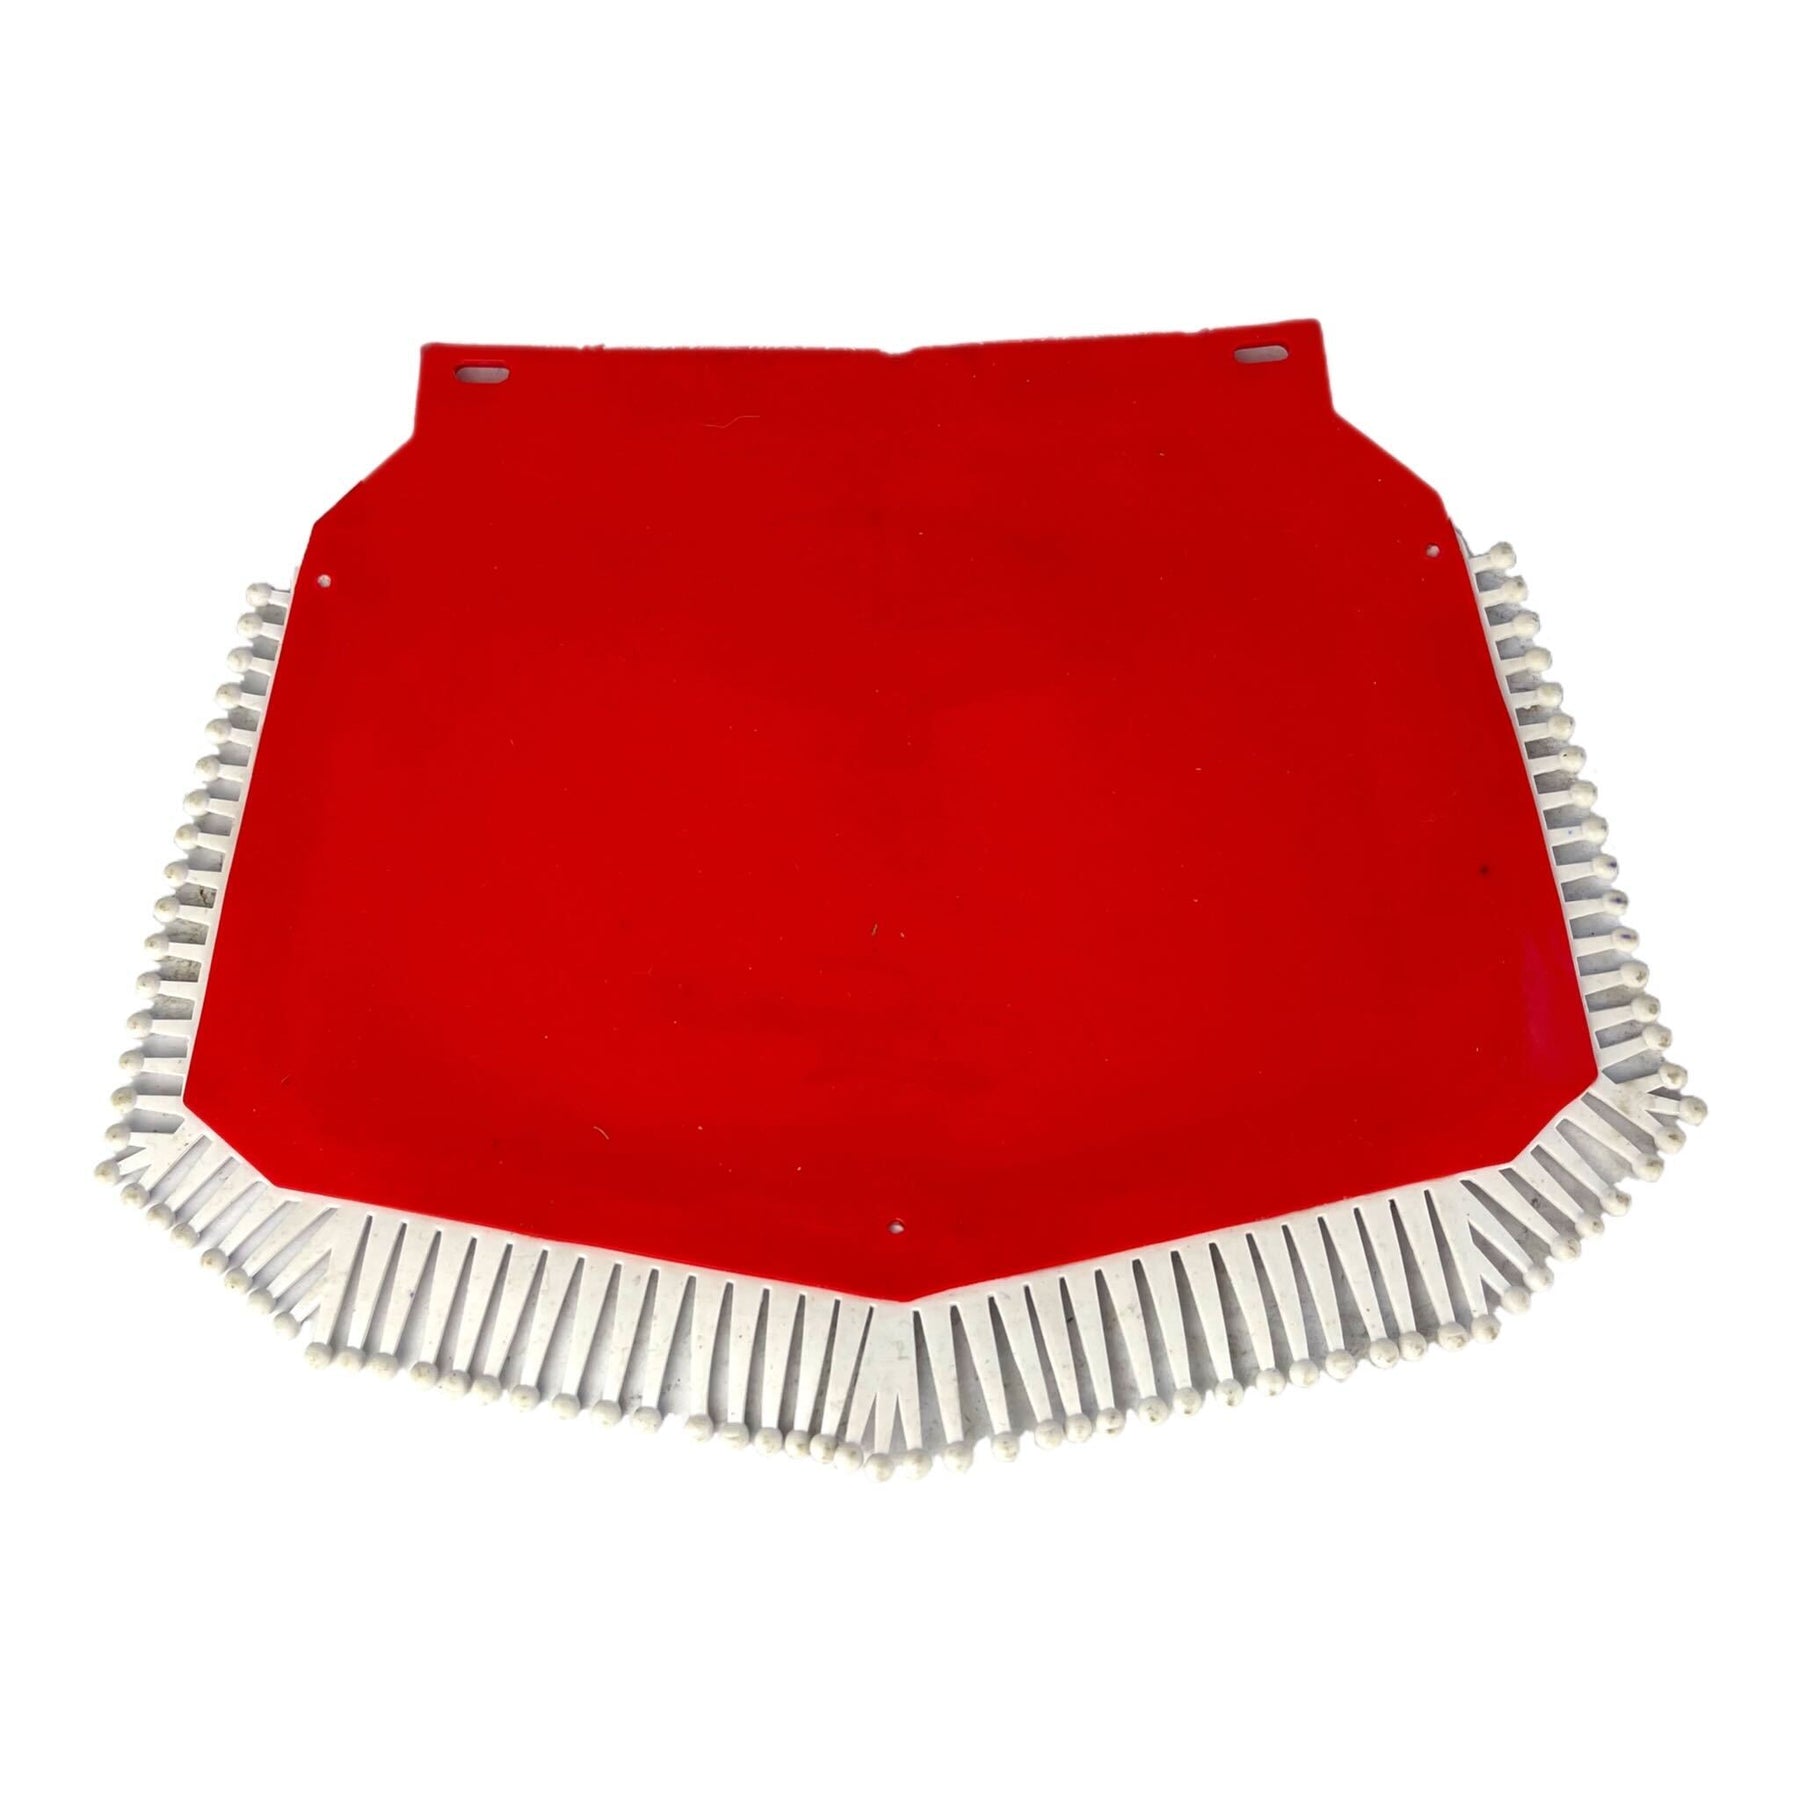 Lambretta Vespa Scooter Red Mudflap With White Tassels